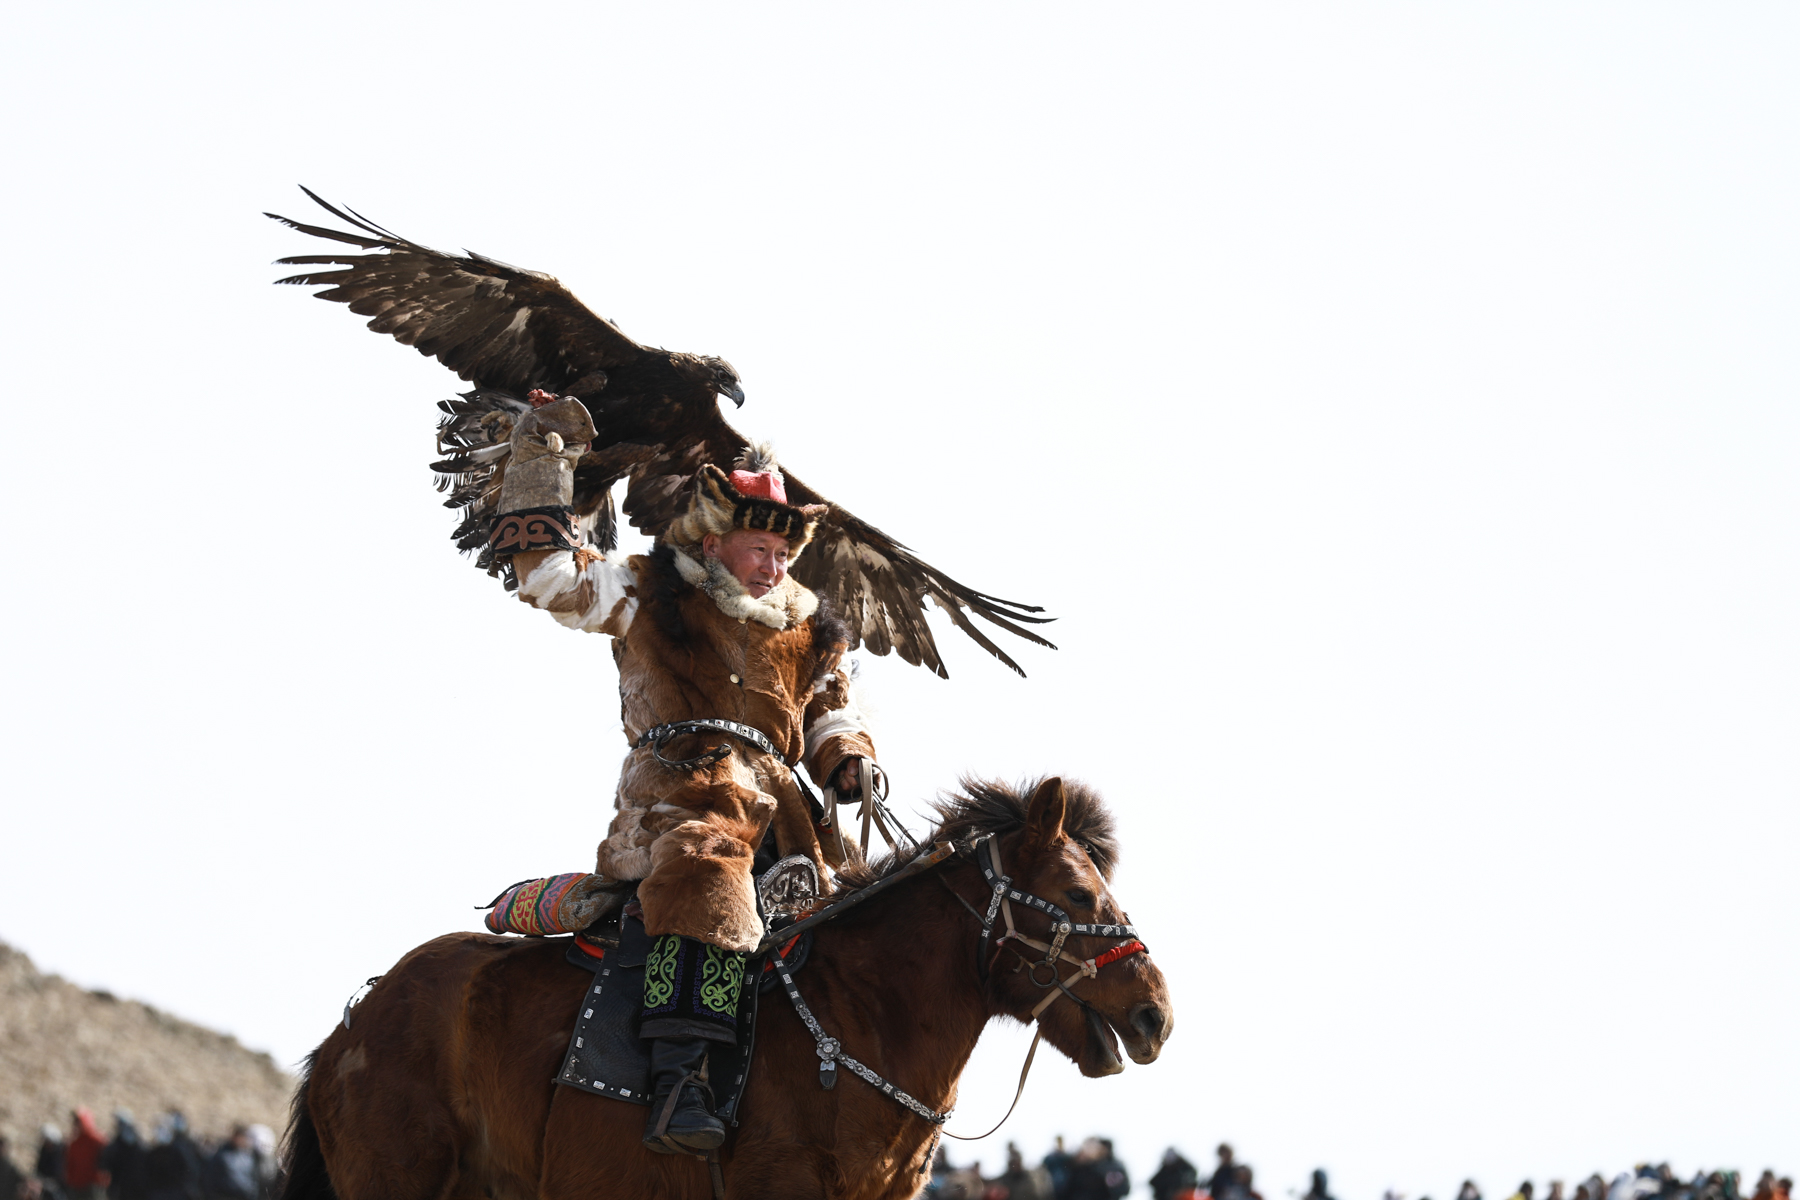 Eagle Festival, intangible cultural heritage of Mongolia